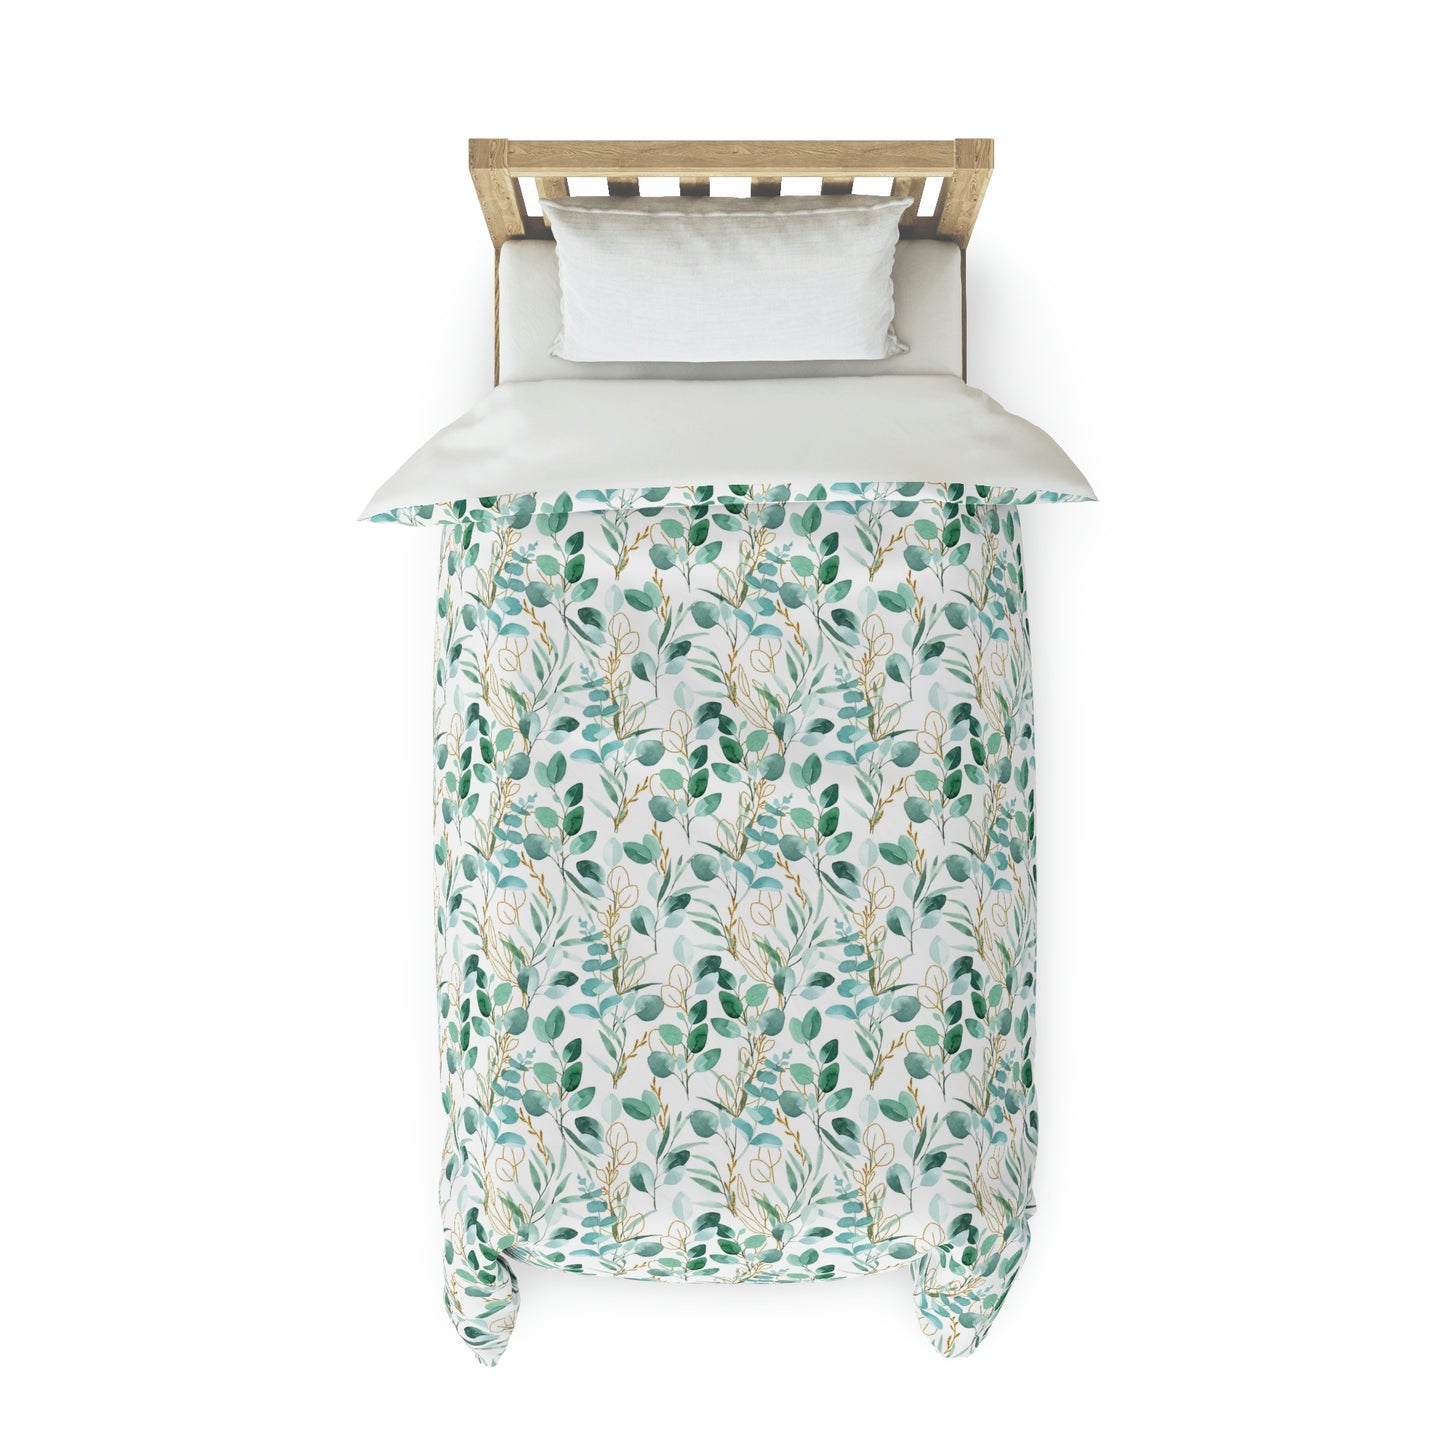 Green & Gold Floral Pattern Duvet Cover lying on a bed, microfiber duvet cover bedroom accent